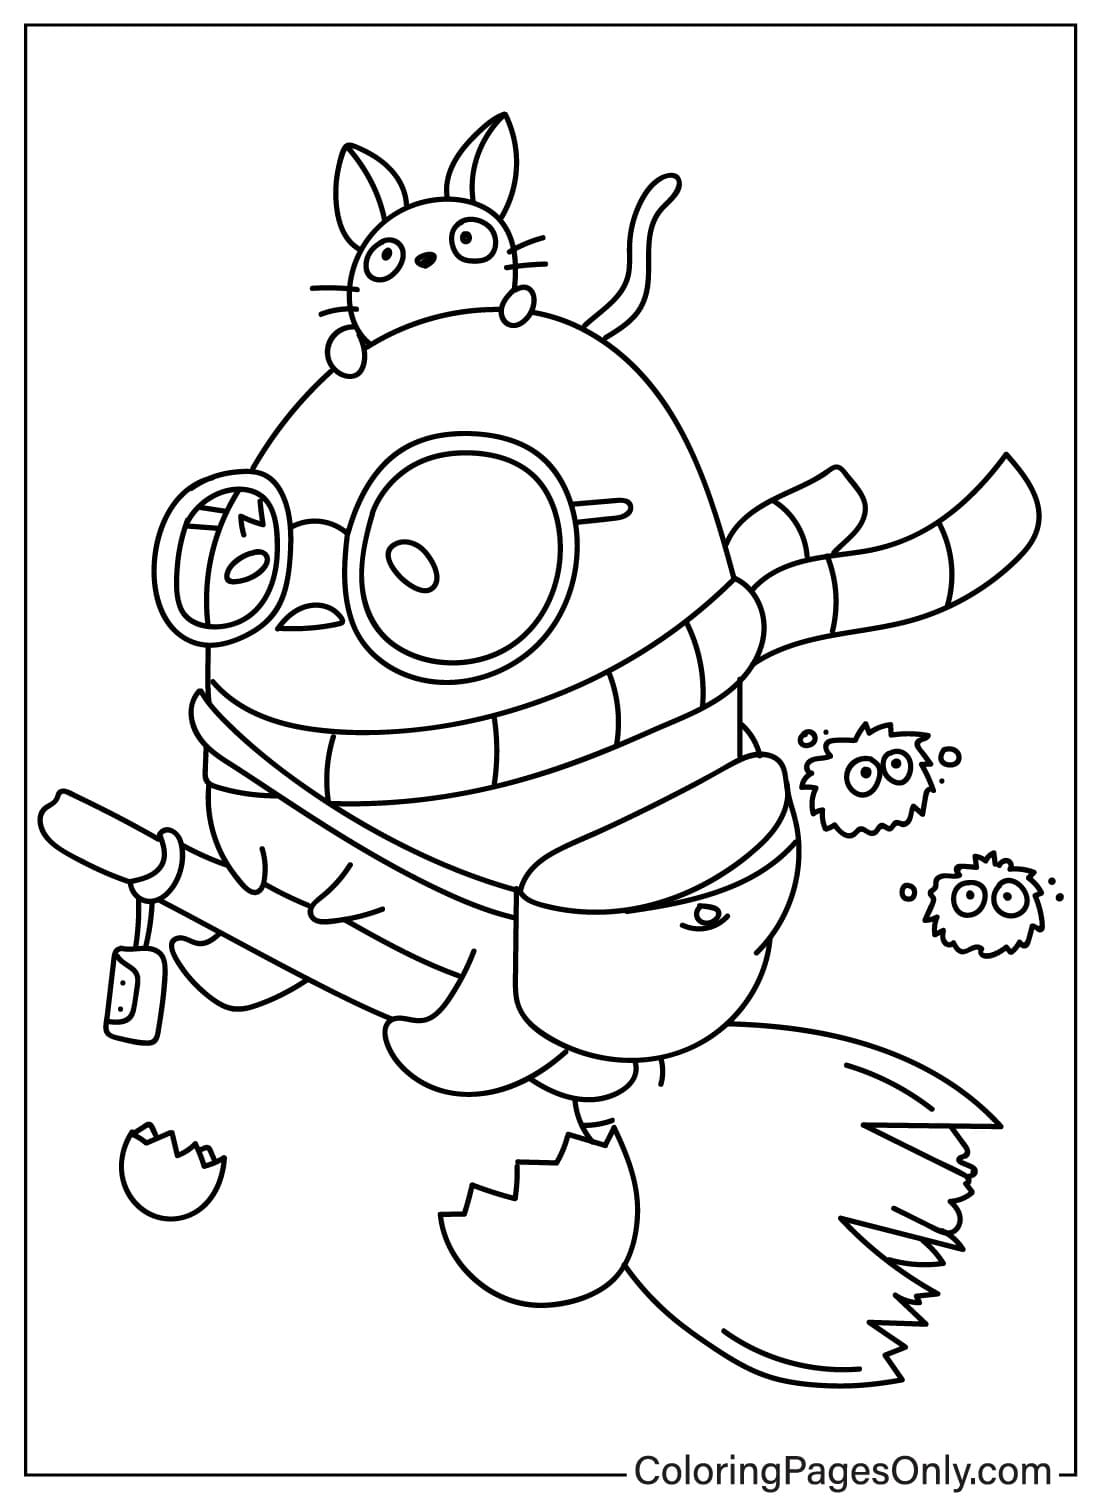 Witch Gudetama Coloring Page from Gudetama